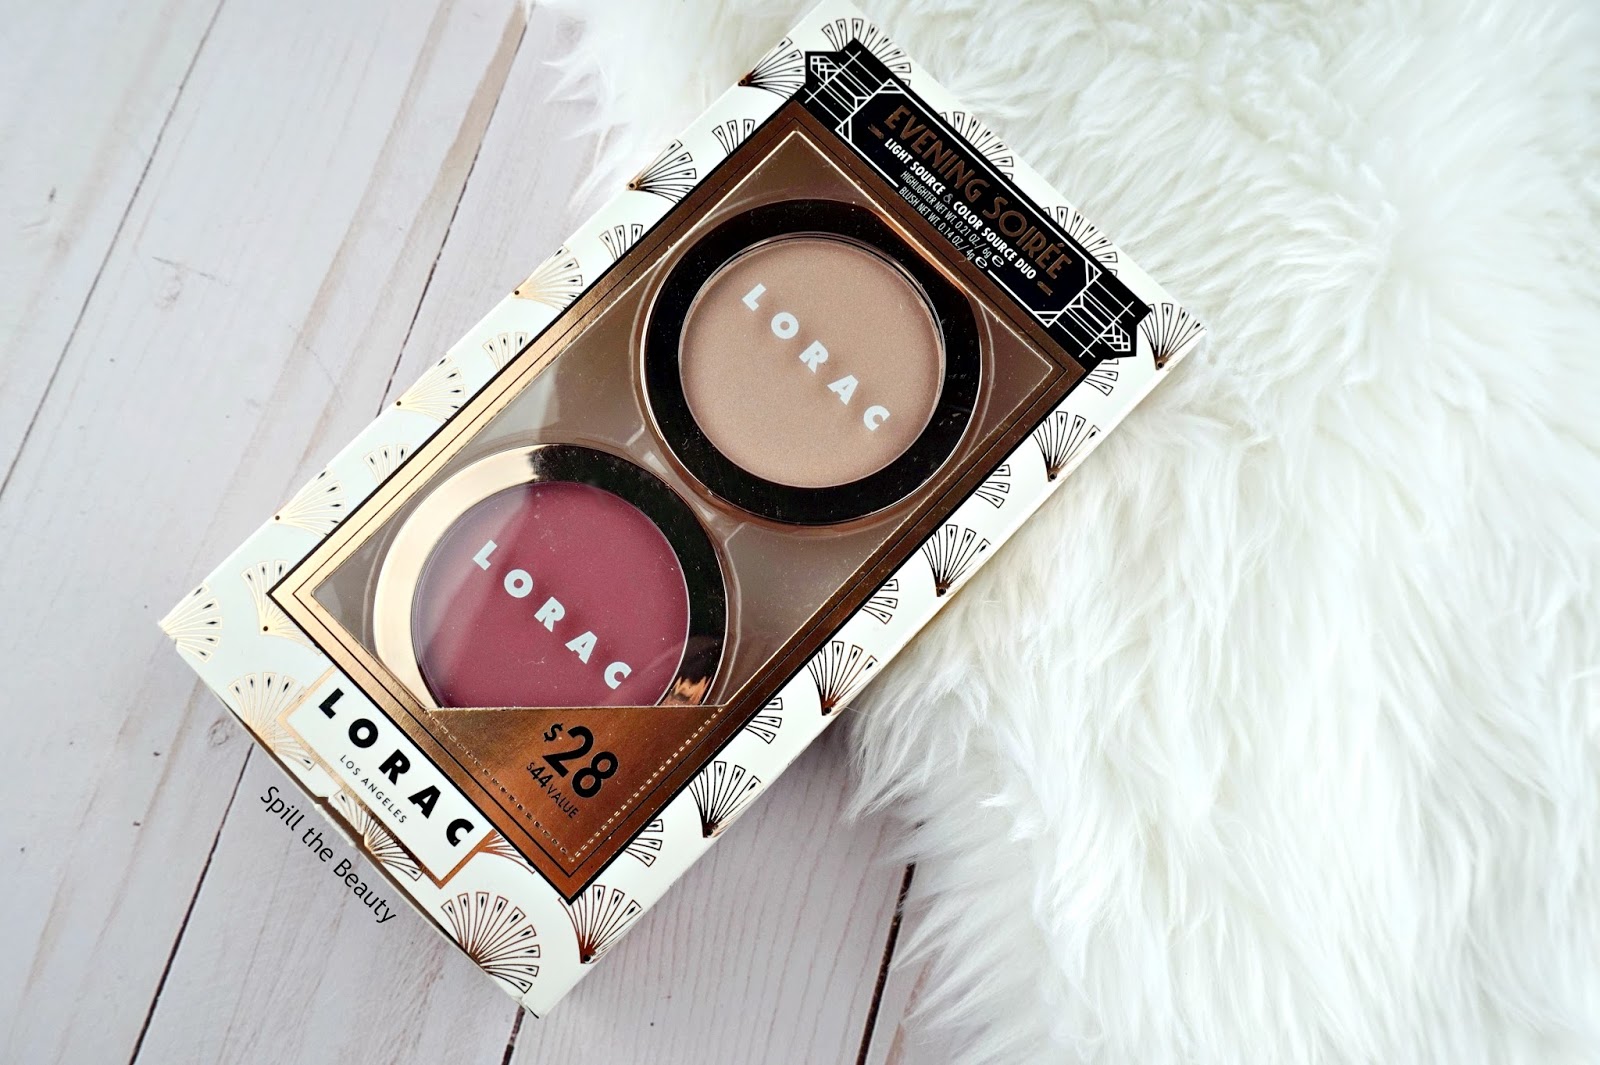 Lorac ‘Evening Soirée’ Light Source & Color Source Duo – Review, Swatches, and Look